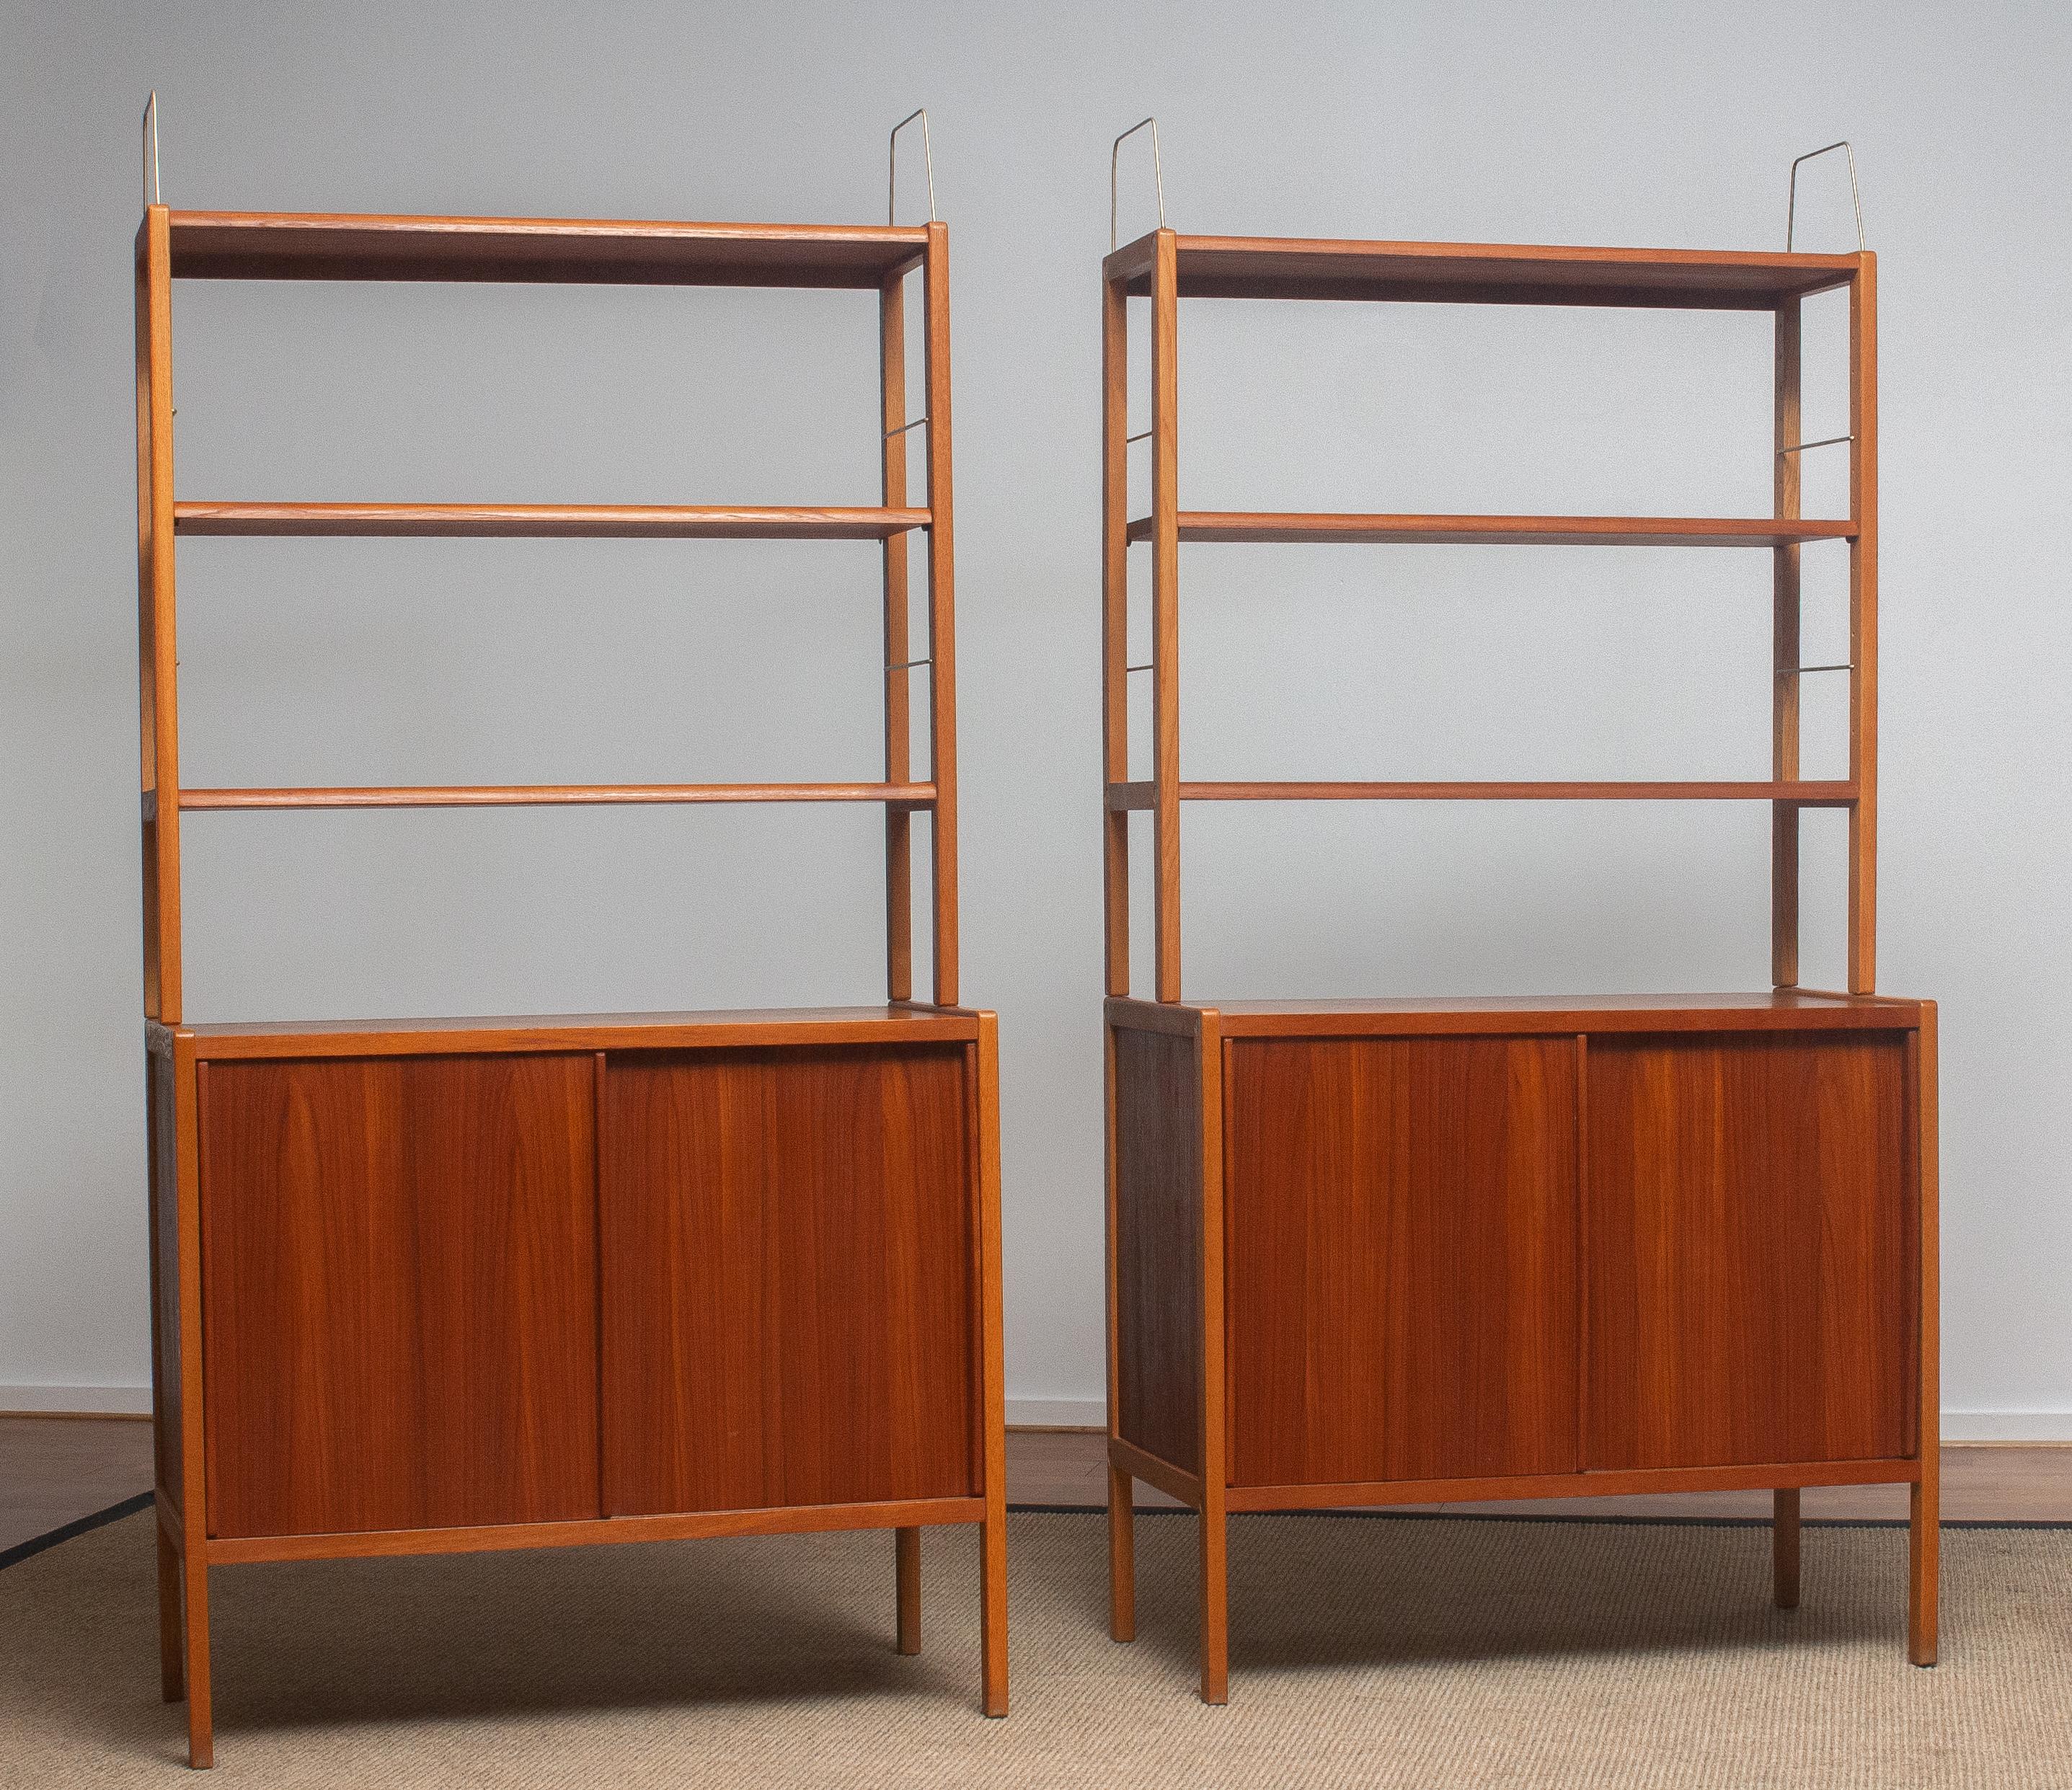 Beautiful and elegant set of two teak bookcases / cabinets with brass details and two sliding doors by Bertil Fridhagen for Bodafors, Sweden, 1960s.

Both lower parts of the cabinets have two sliding doors and inside the original shelfs with logo